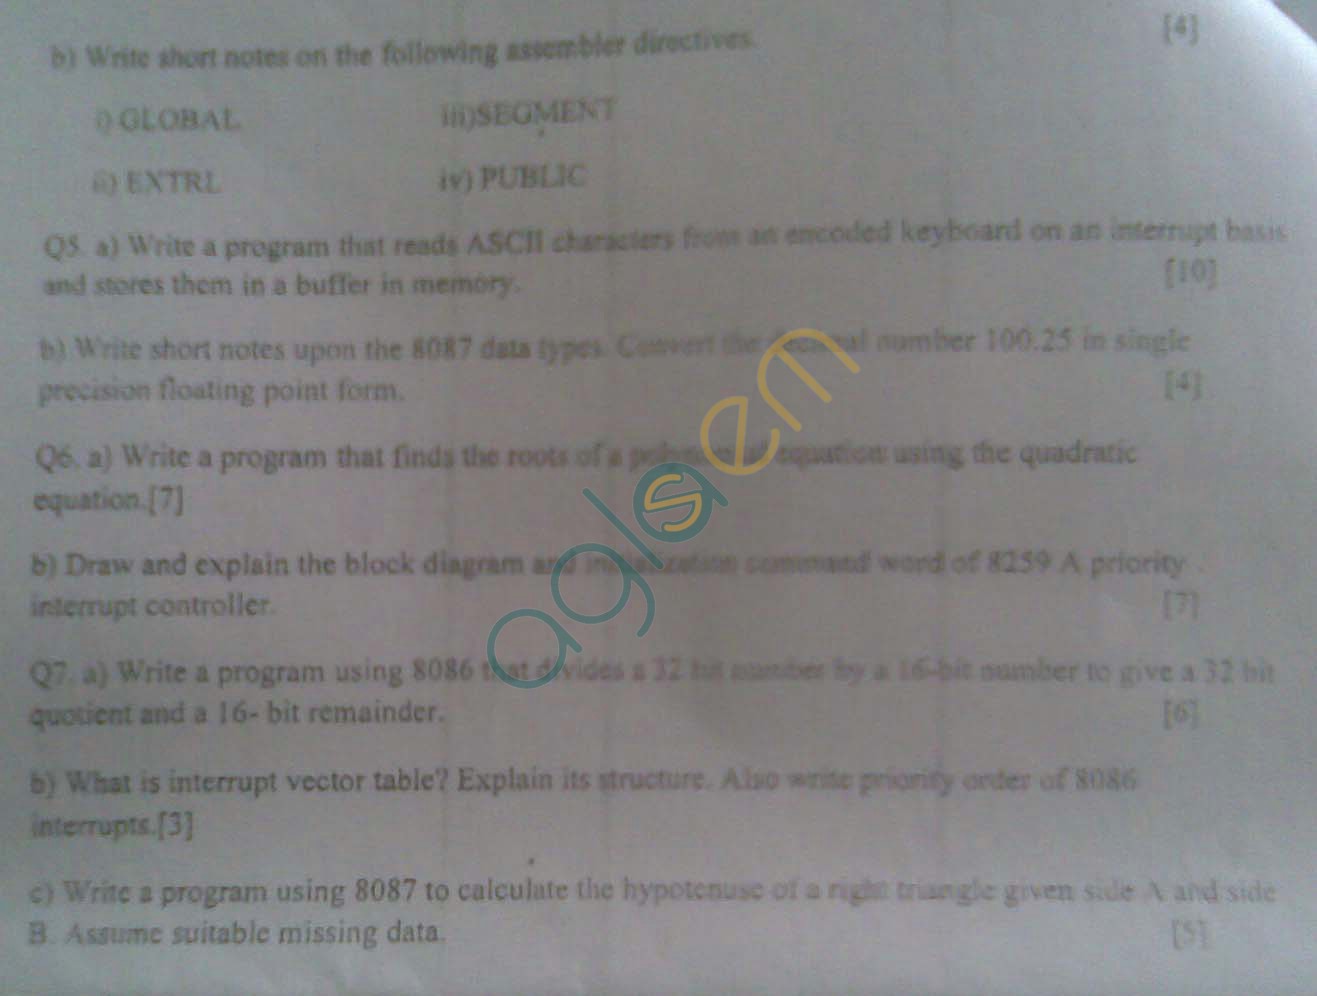 NSIT: Question Papers 2009 – 7 Semester - End Sem - IC-405